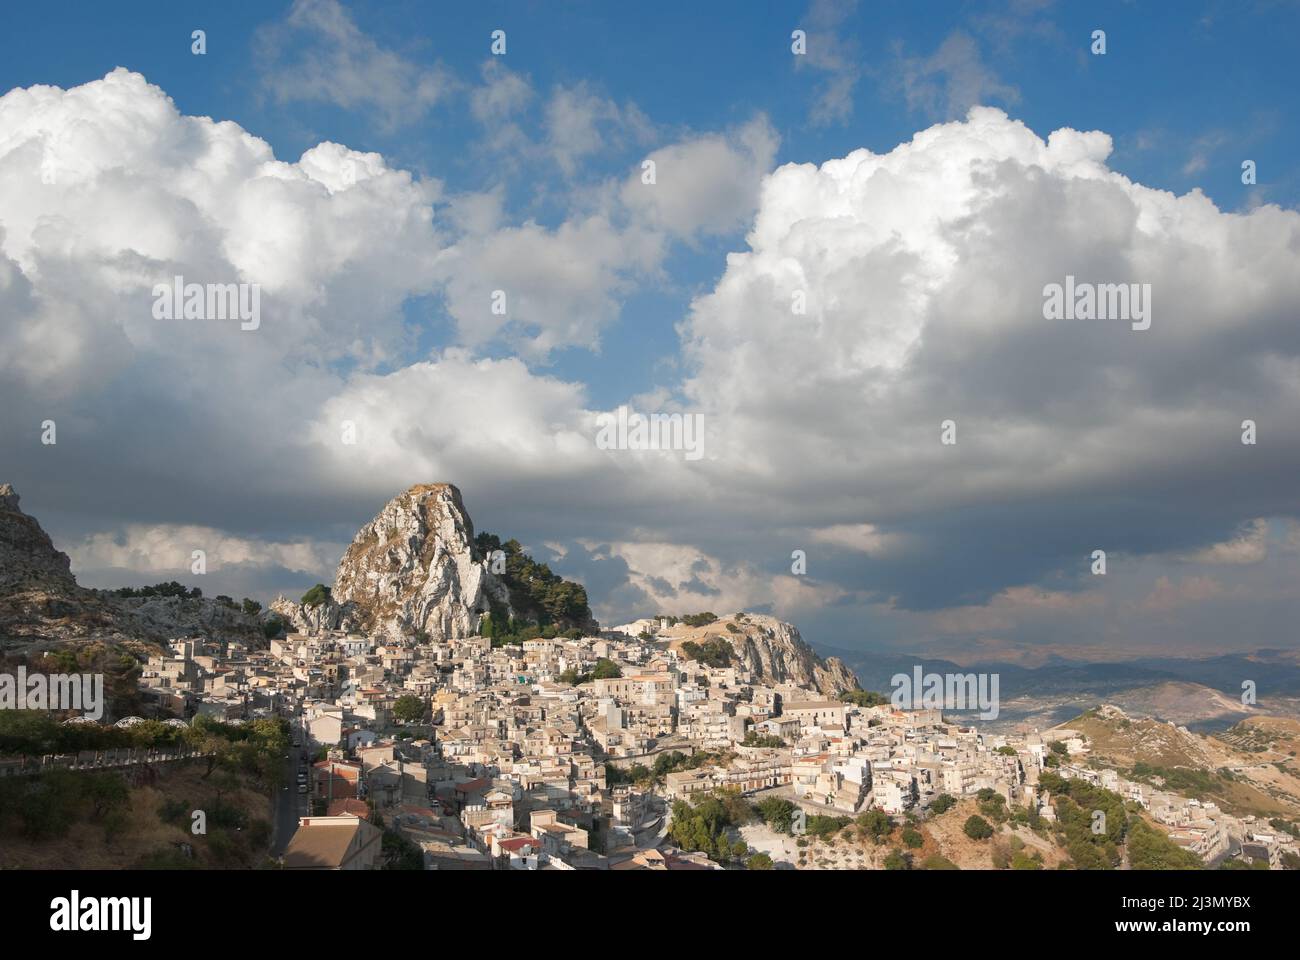 rock of Caltabellotta village in Sicily, in the background dramatic sky with big clouds Stock Photo